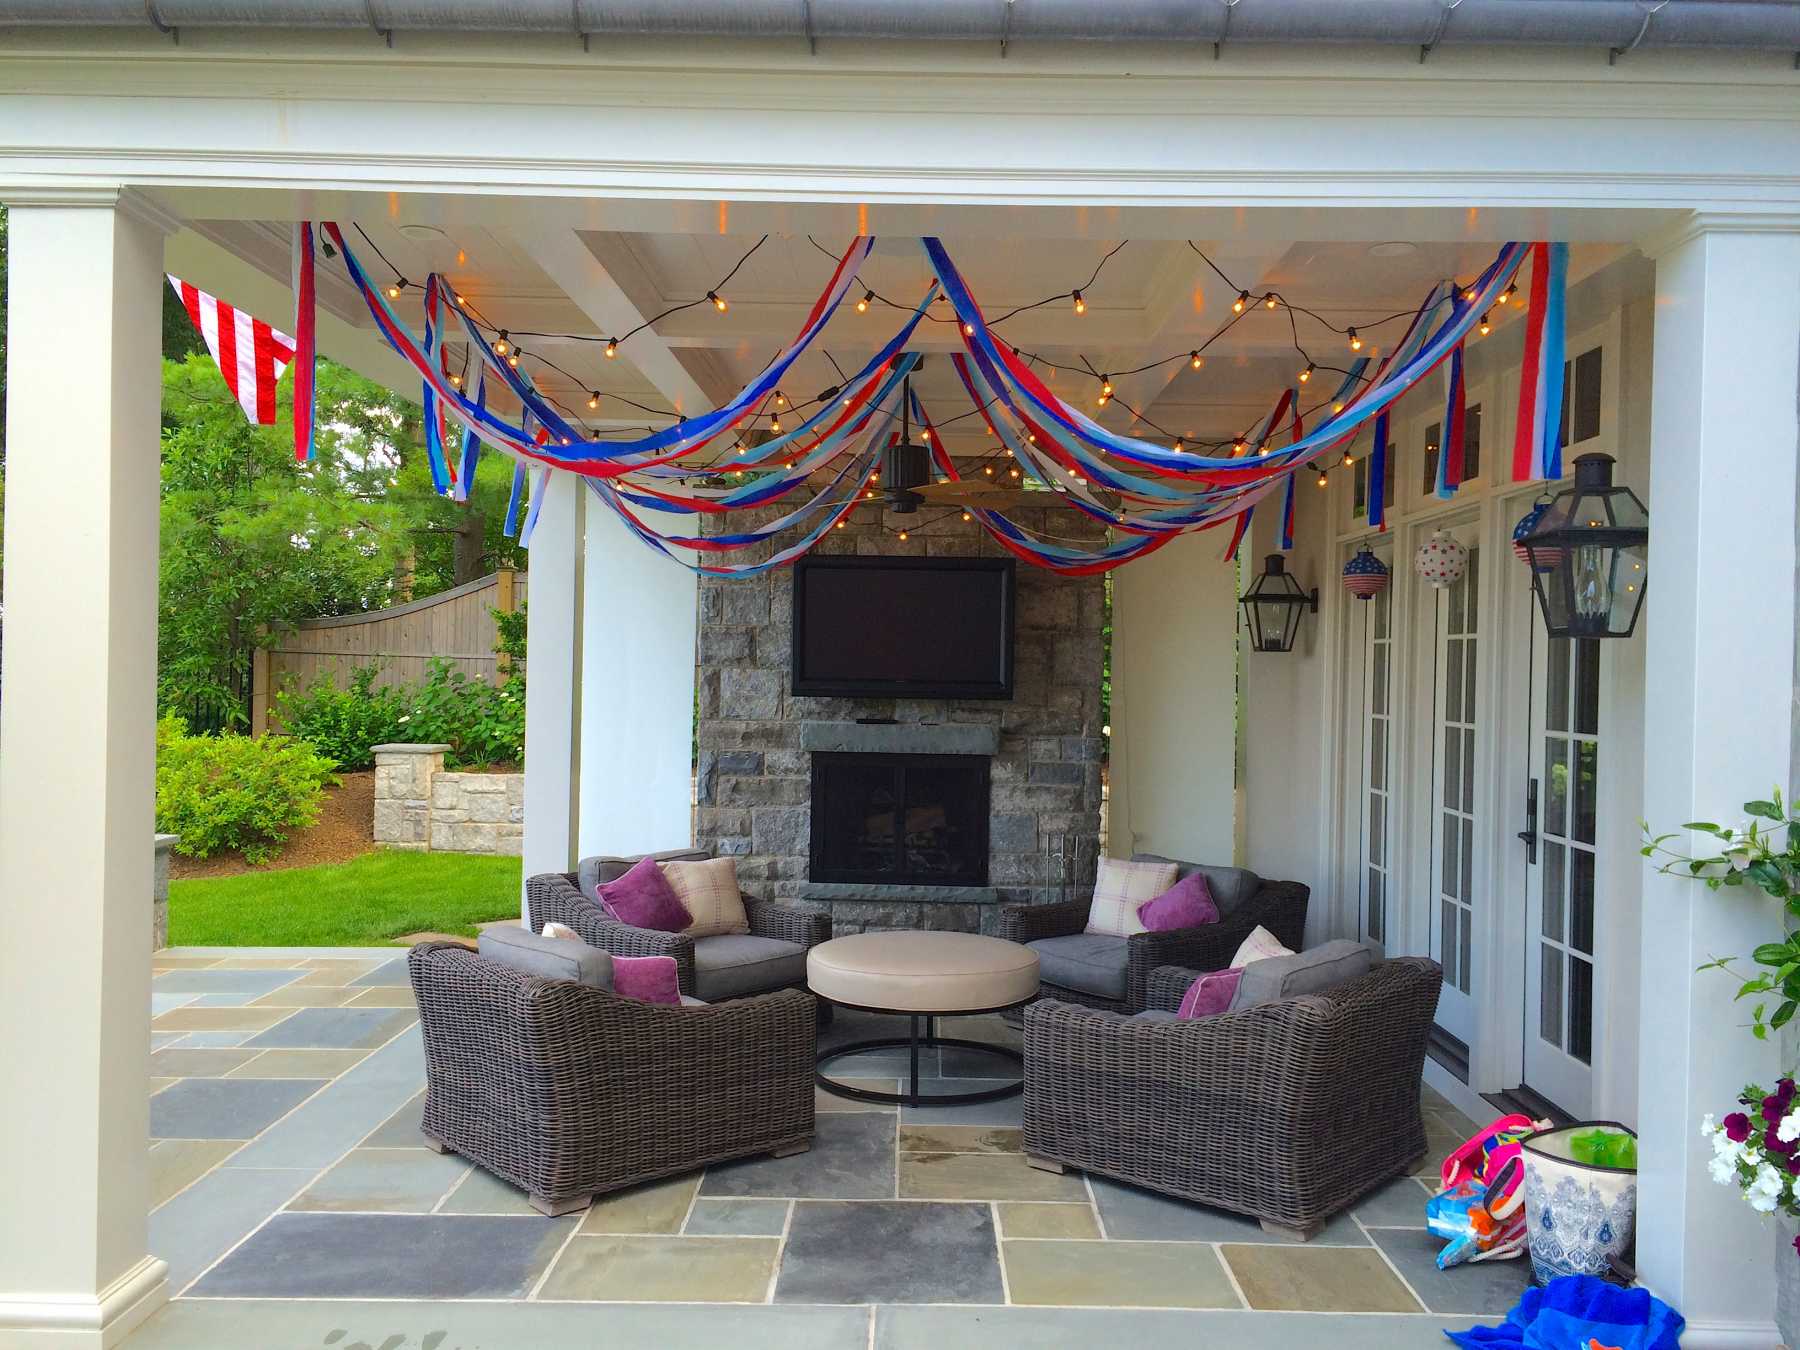 4th of July - Design Ideas